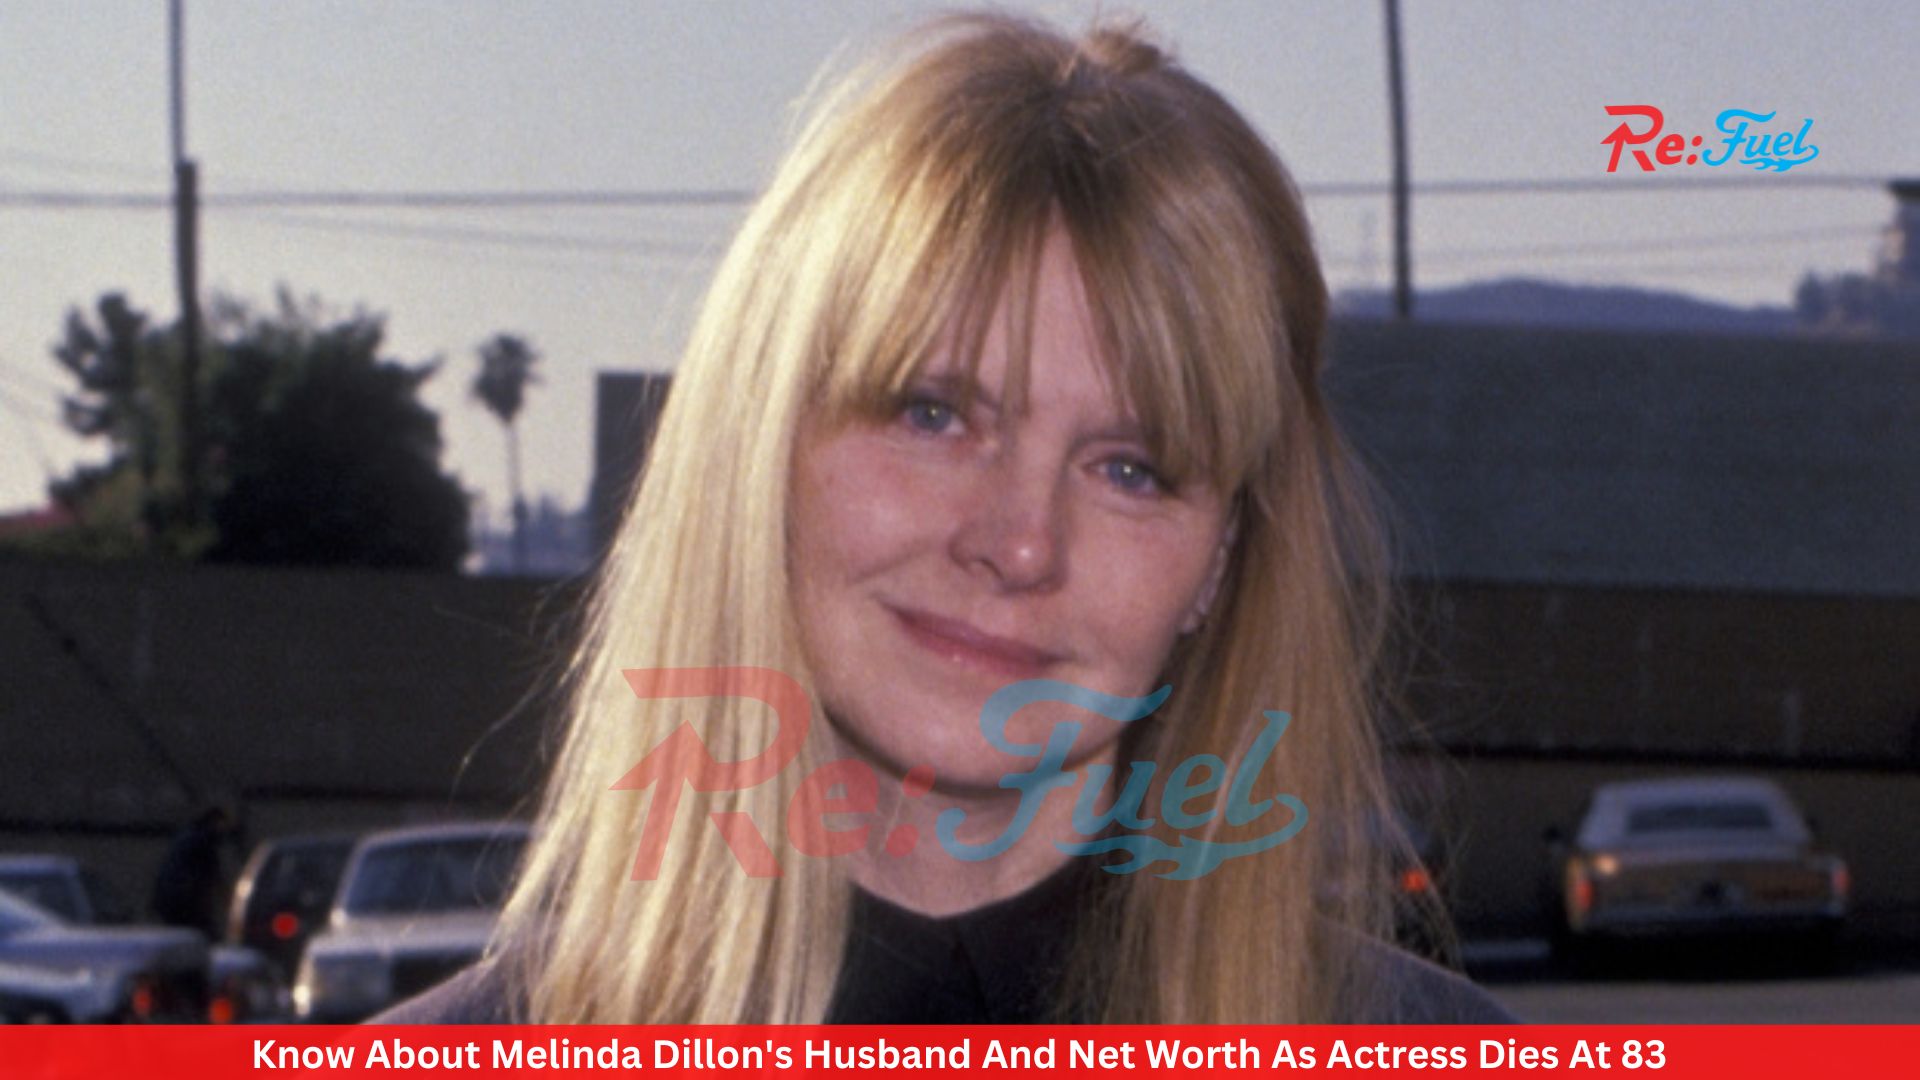 Know About Melinda Dillon's Husband And Net Worth As Actress Dies At 83